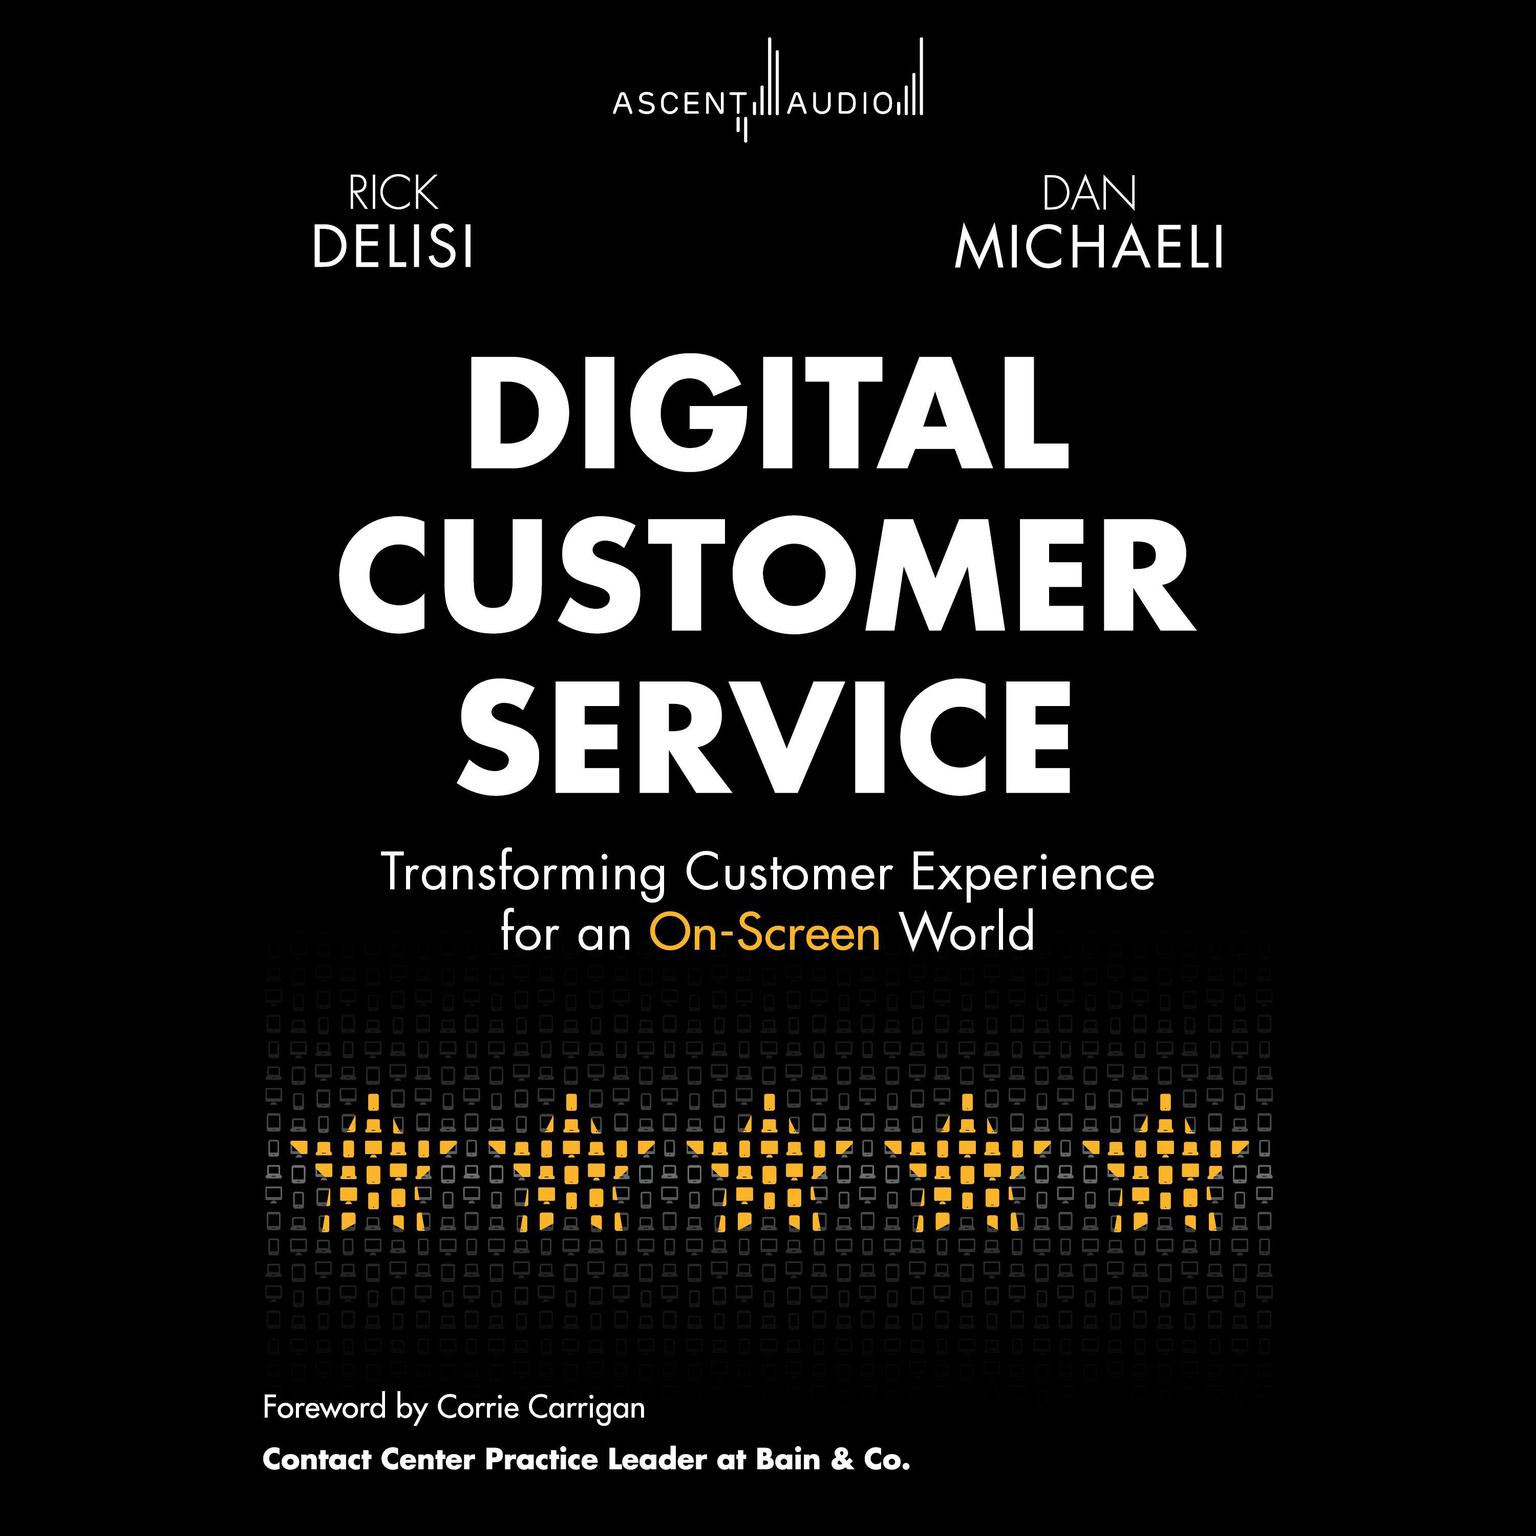 Digital Customer Service: Transforming Customer Experience for An On-Screen World Audiobook, by Rick Delisi